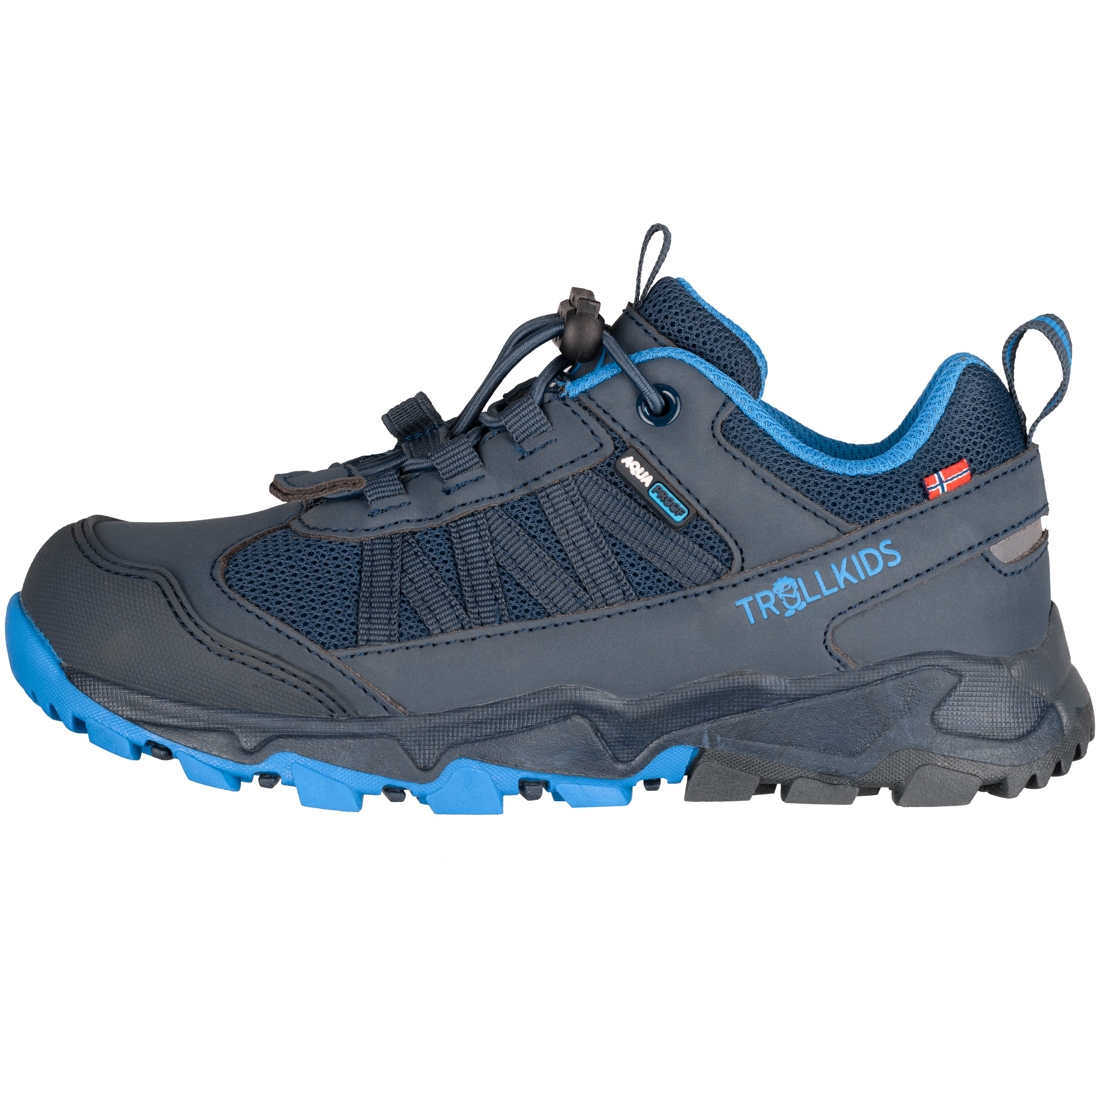 Picture of Trollkids Tronfjell Low Kids Hiker Shoes - Navy/Medium Blue